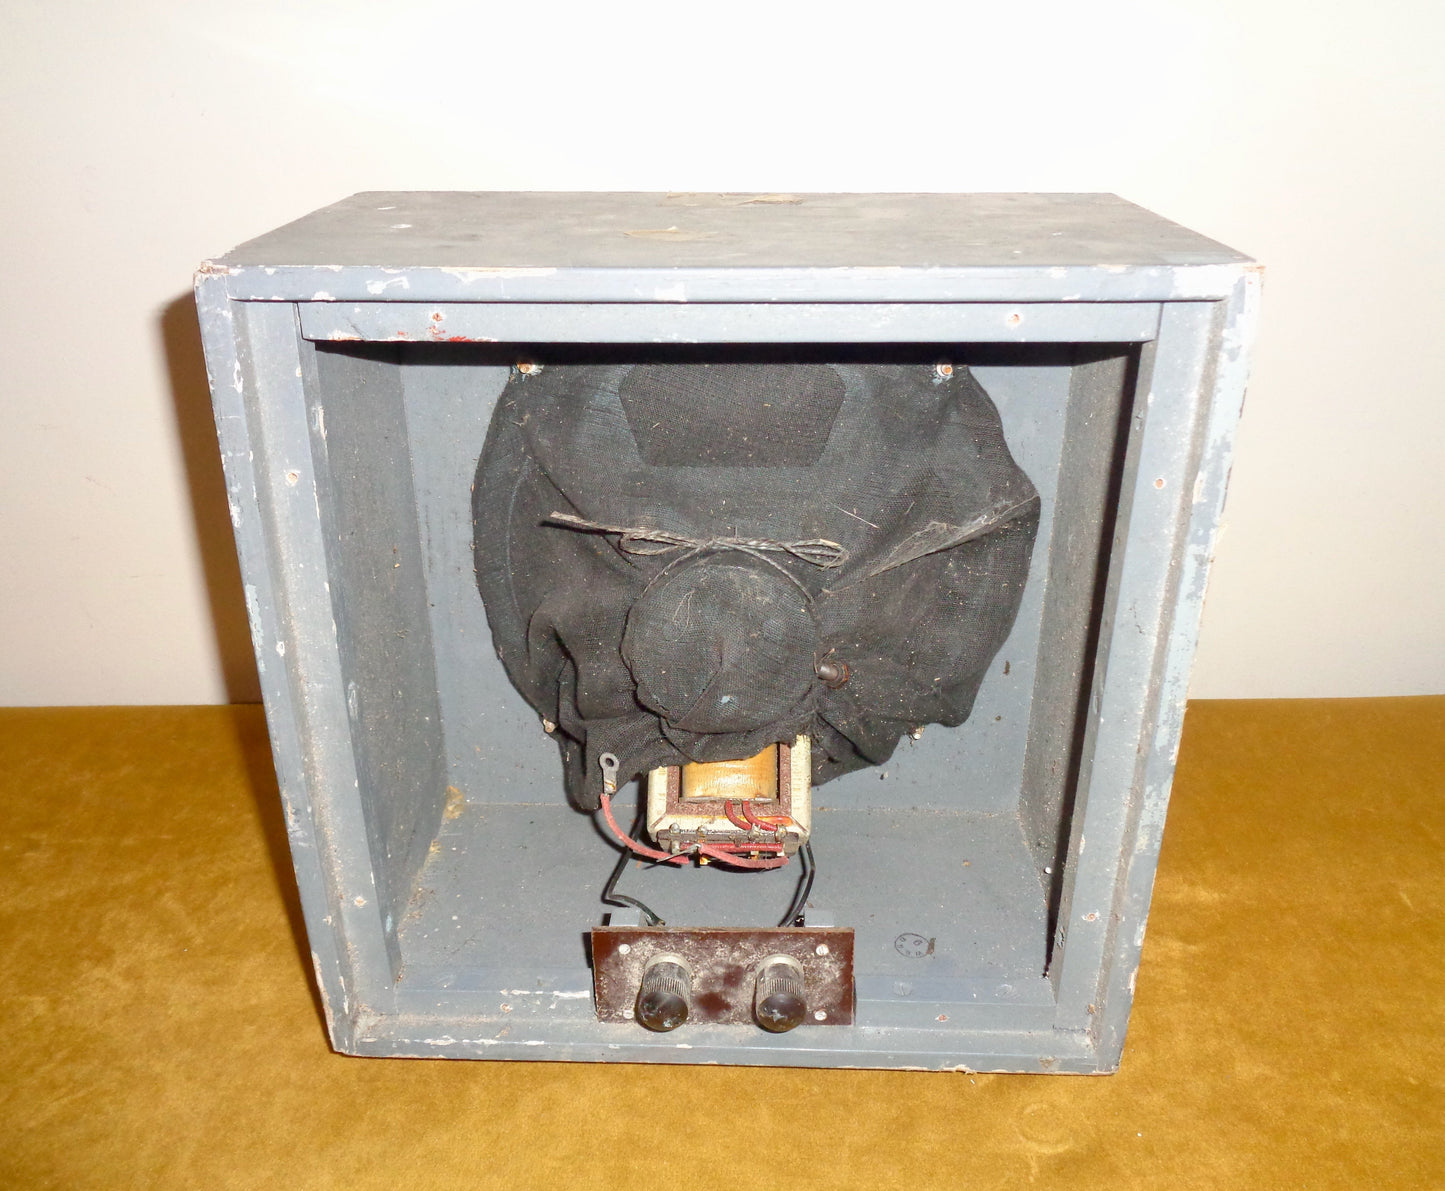 Type 35 RAF Radio Loudspeaker IOU/204 Made For The Air Ministry